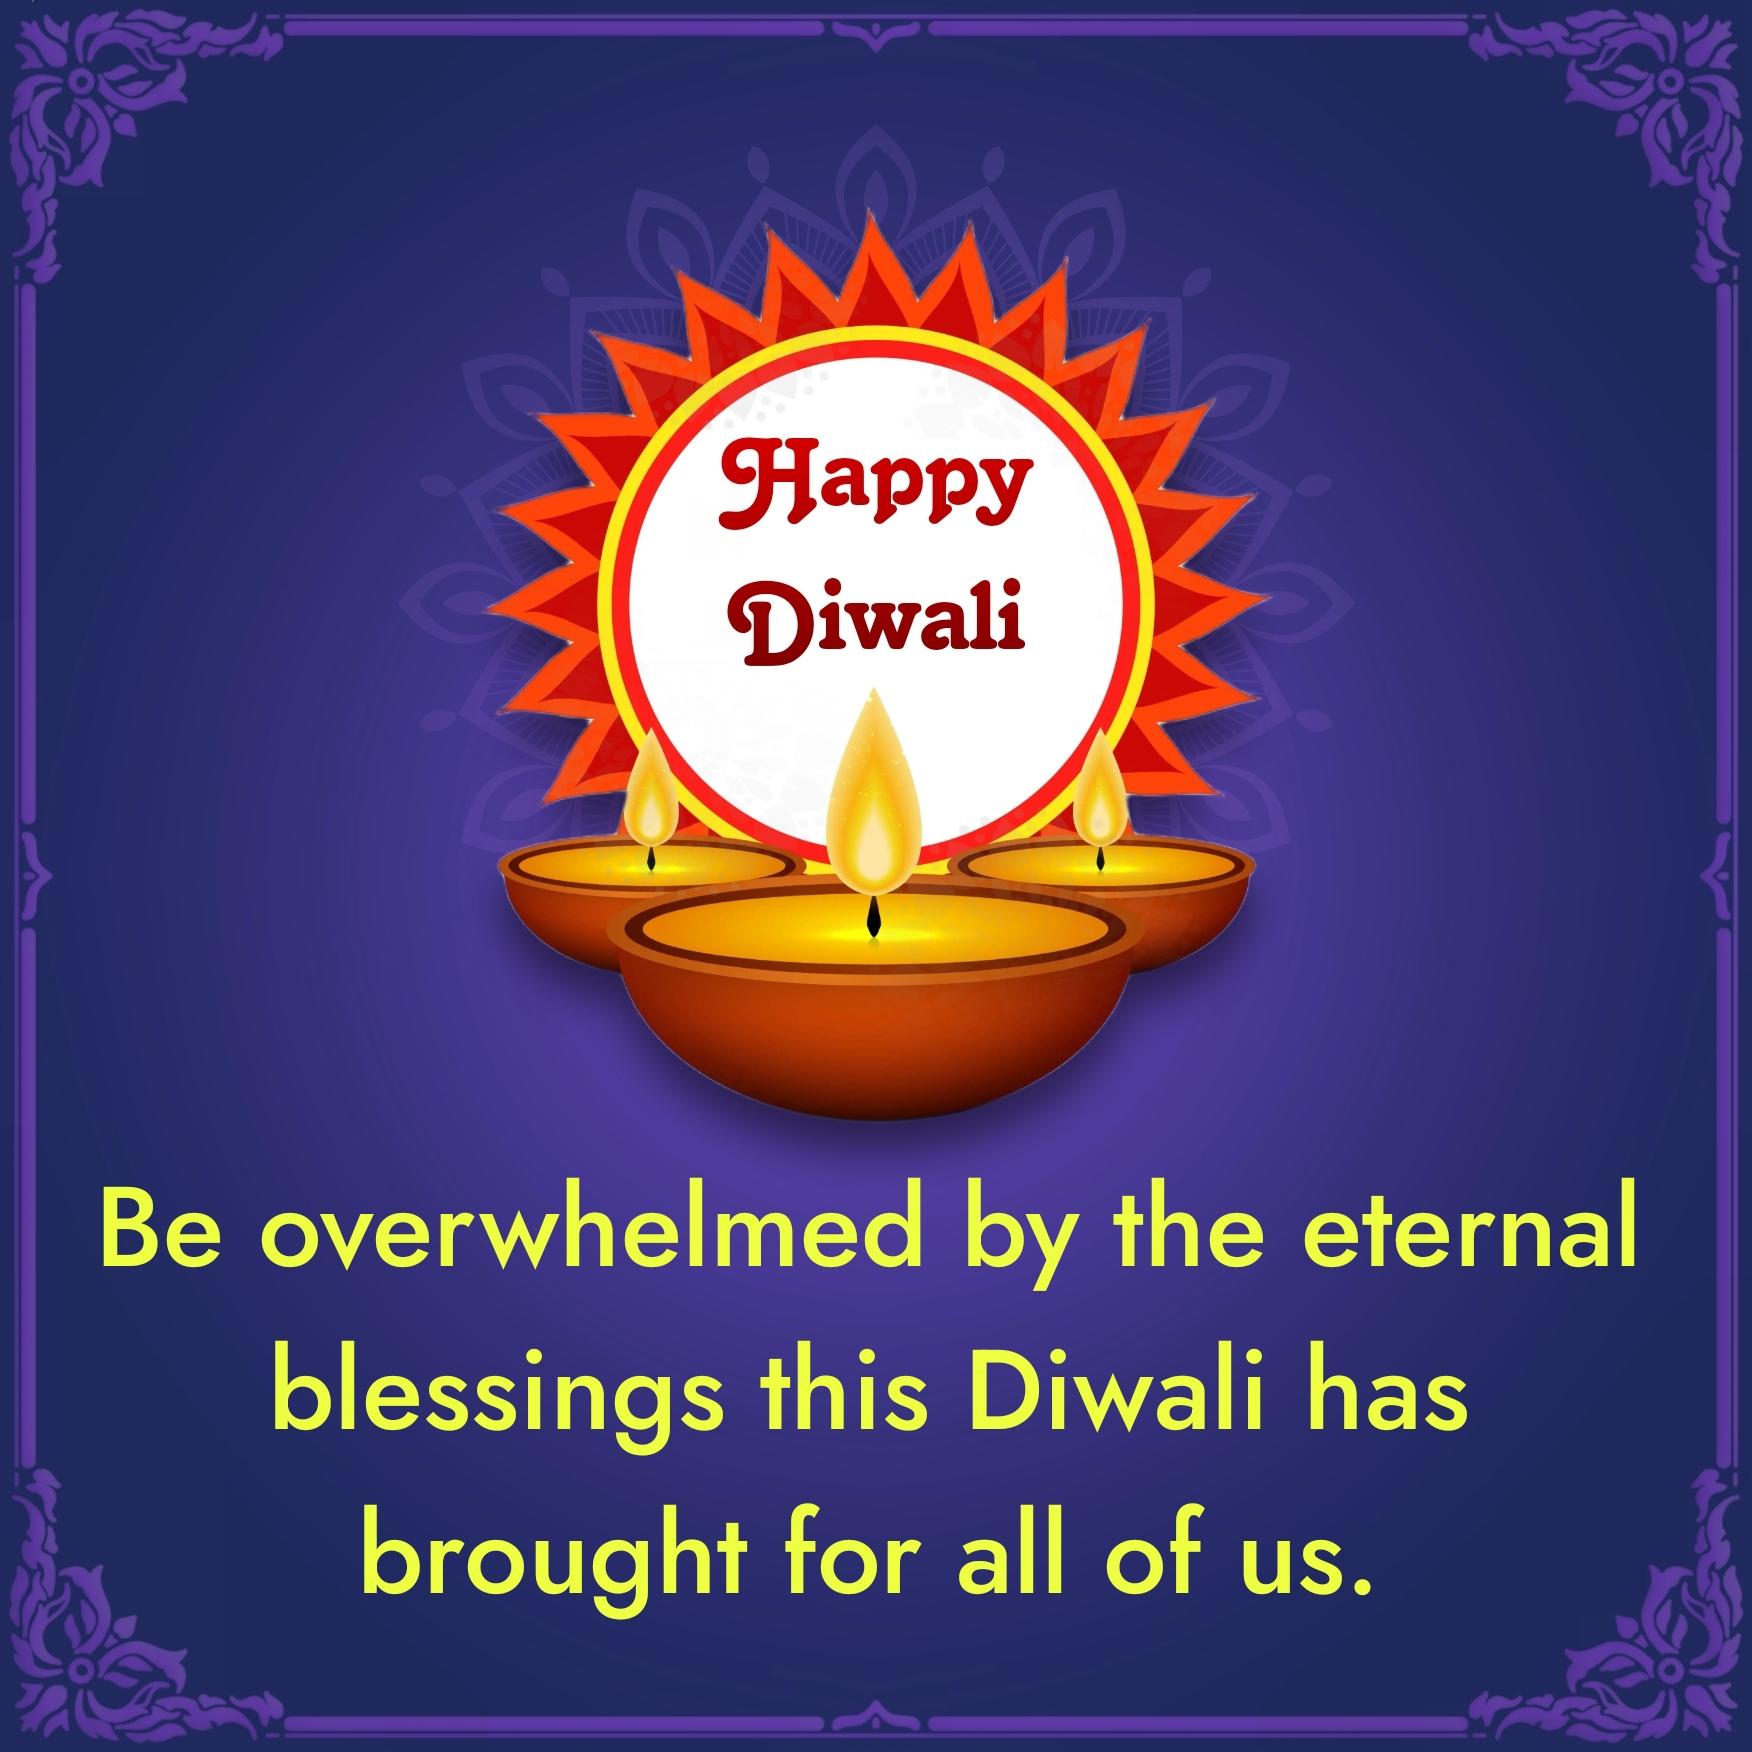 Be overwhelmed by the eternal blessings this Diwali